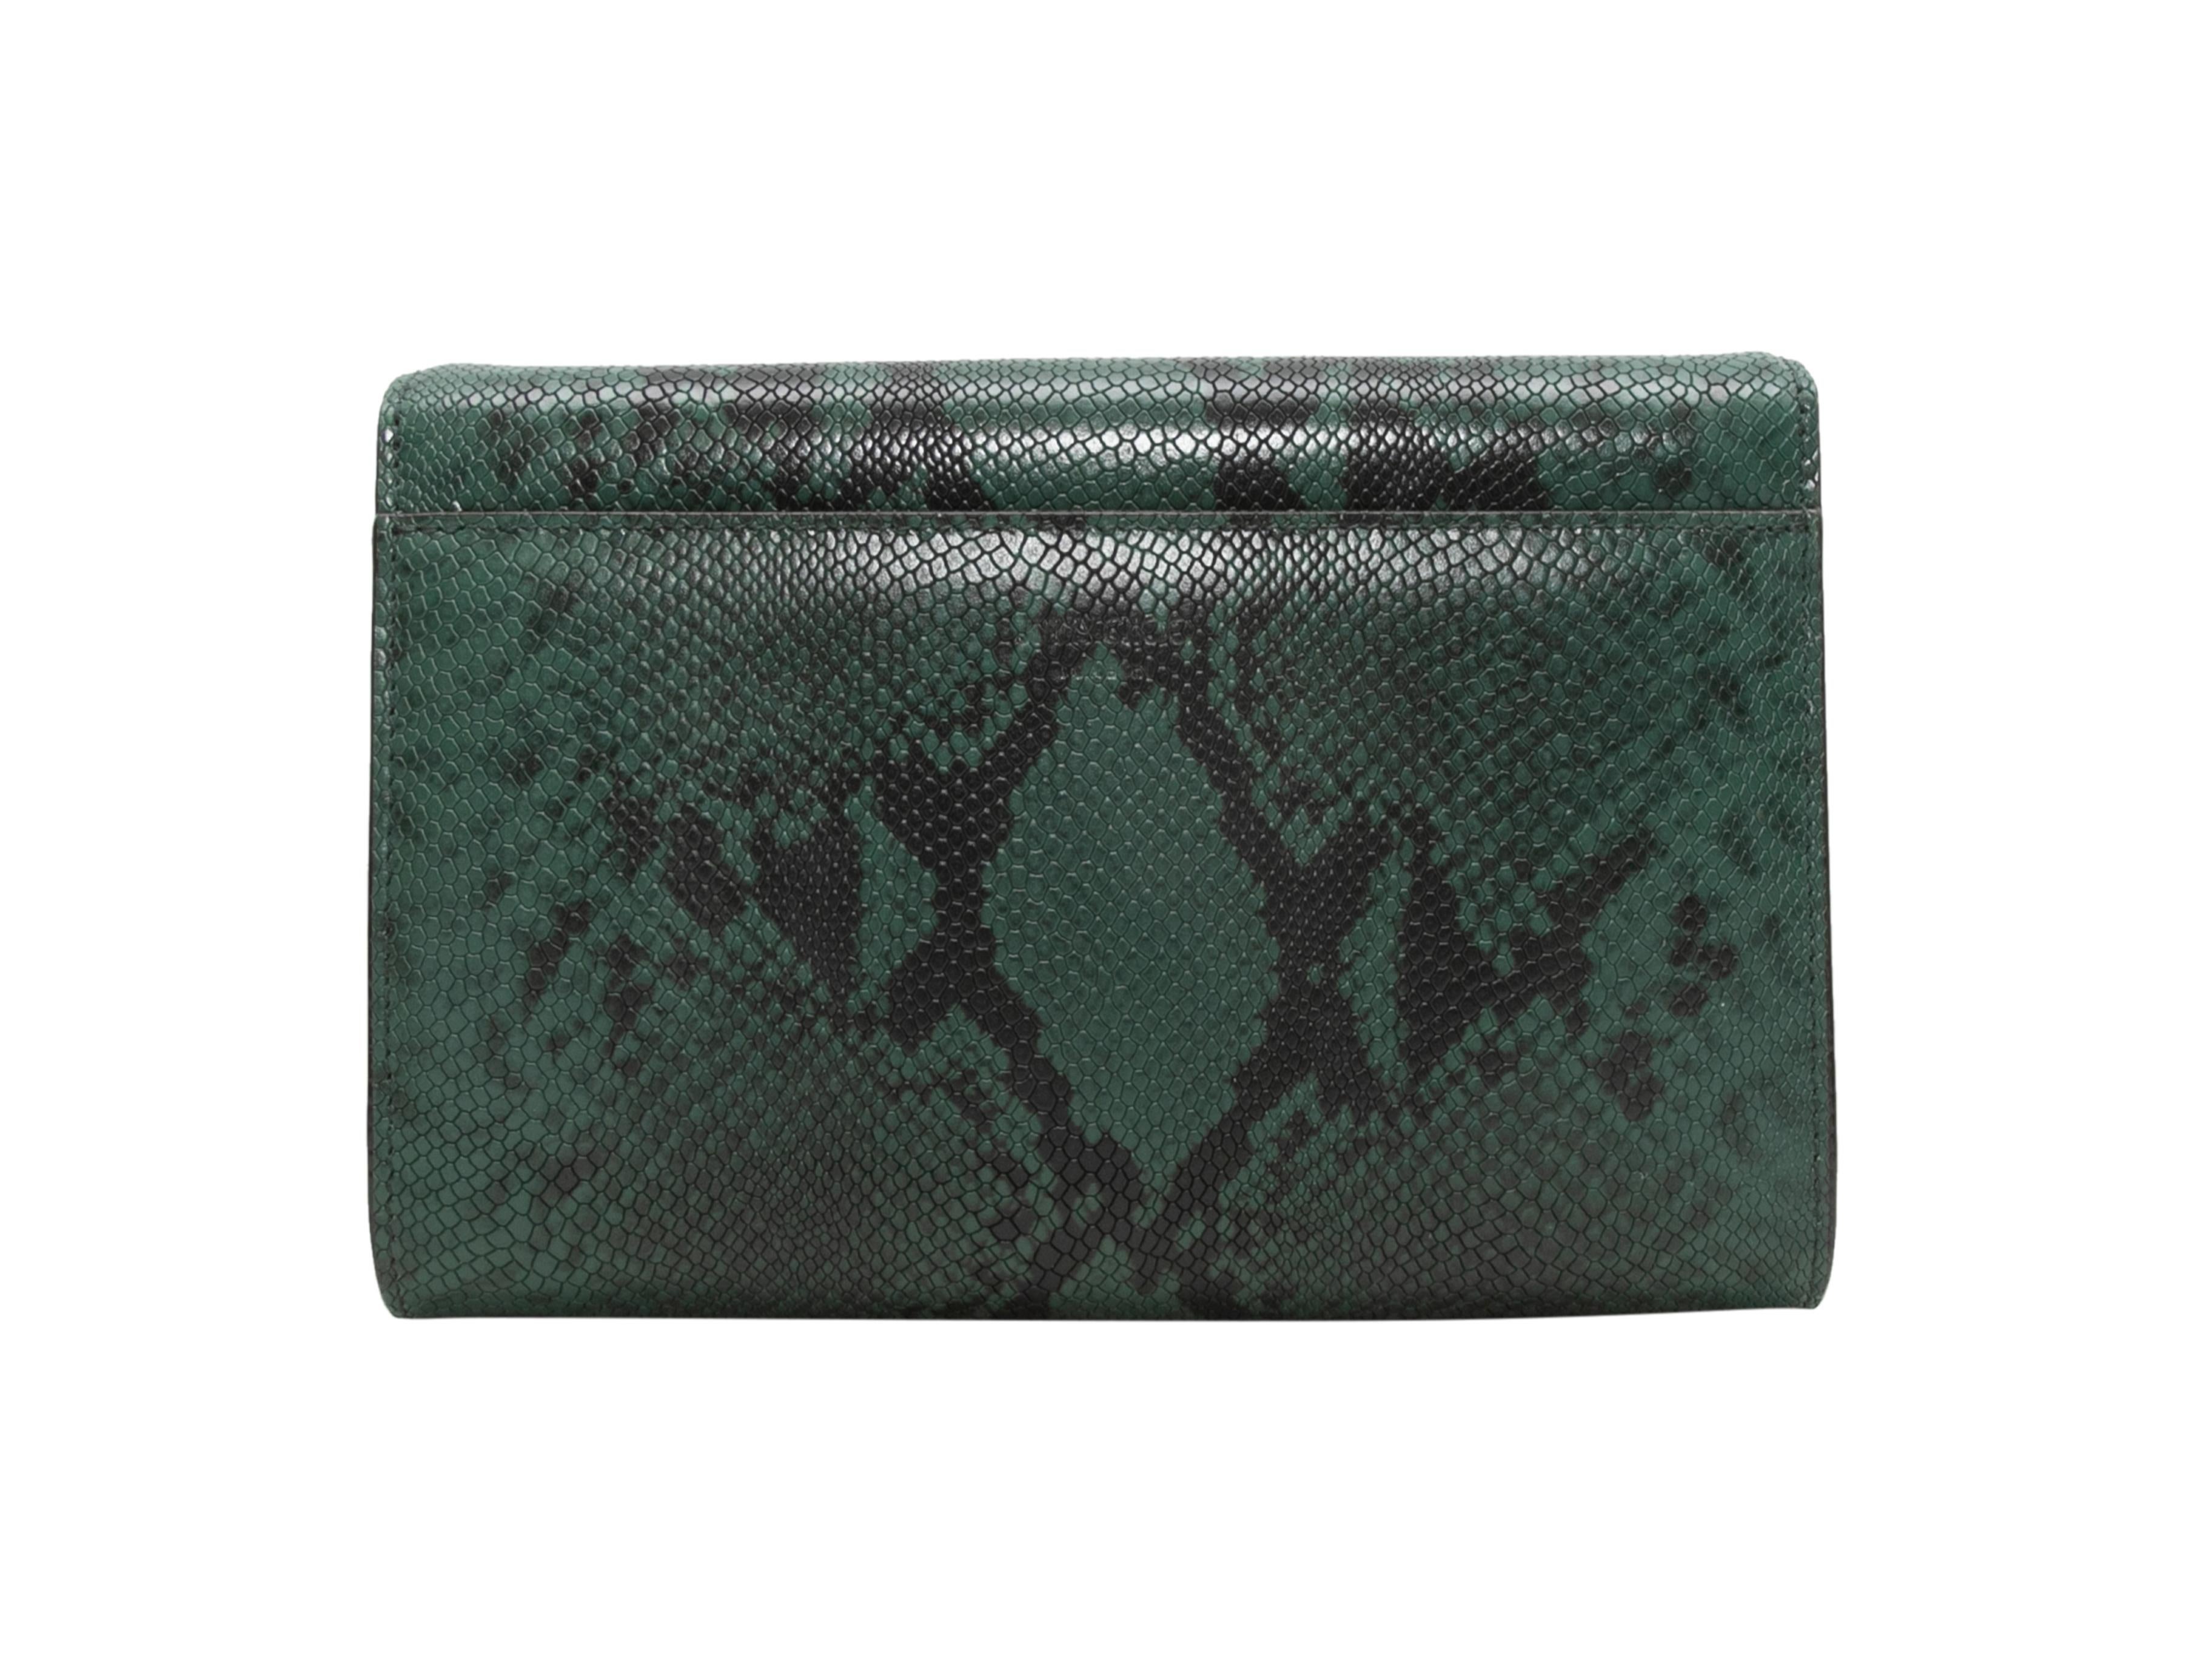 Dark Green & Black Jimmy Choo Embossed Leather Shoulder Bag In Good Condition For Sale In New York, NY